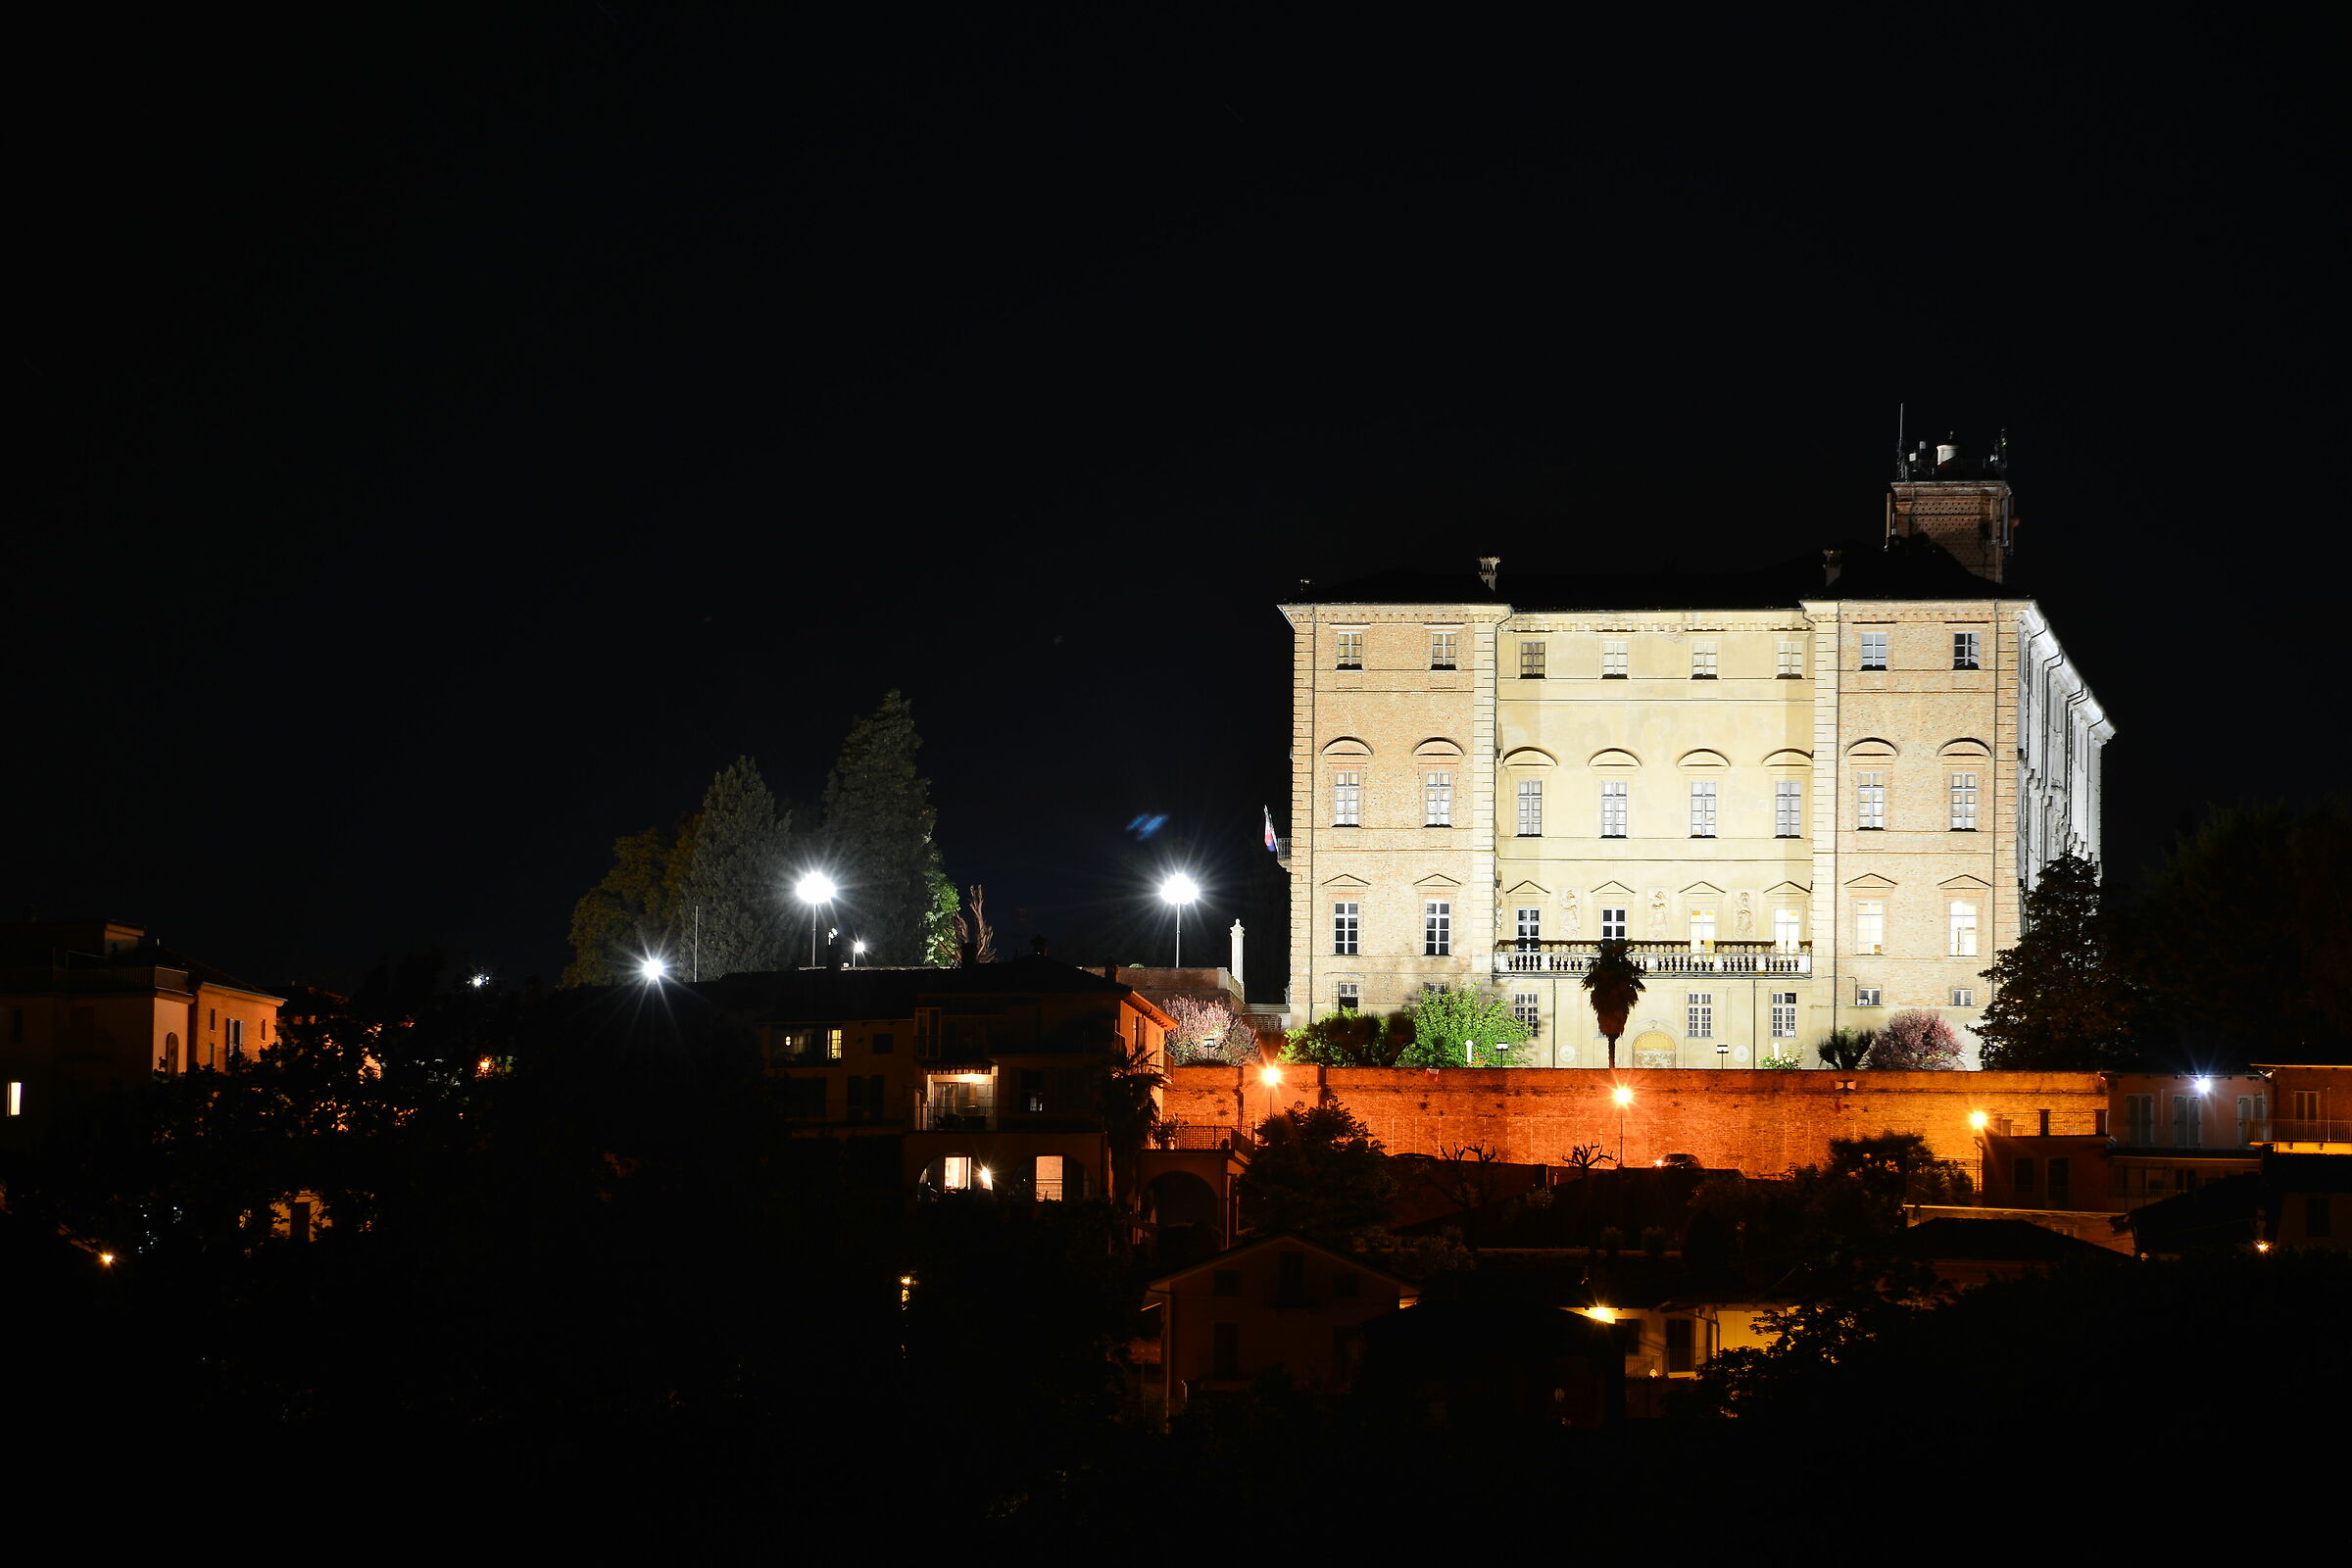 Govone castle by night...